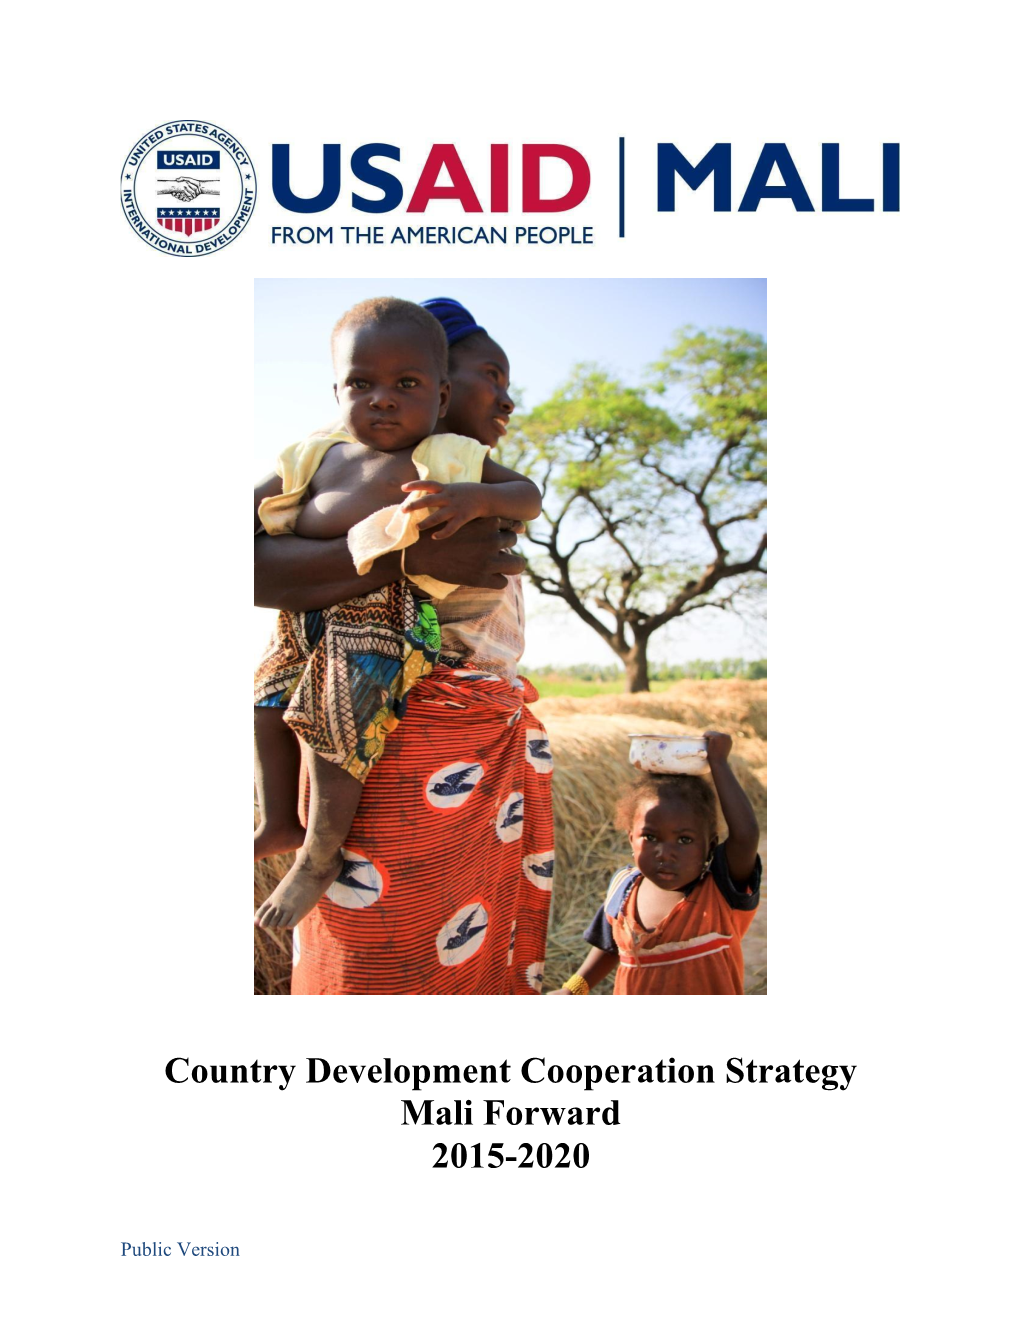 USAID/Mali Country Development Cooperation Strategy 2015-2020